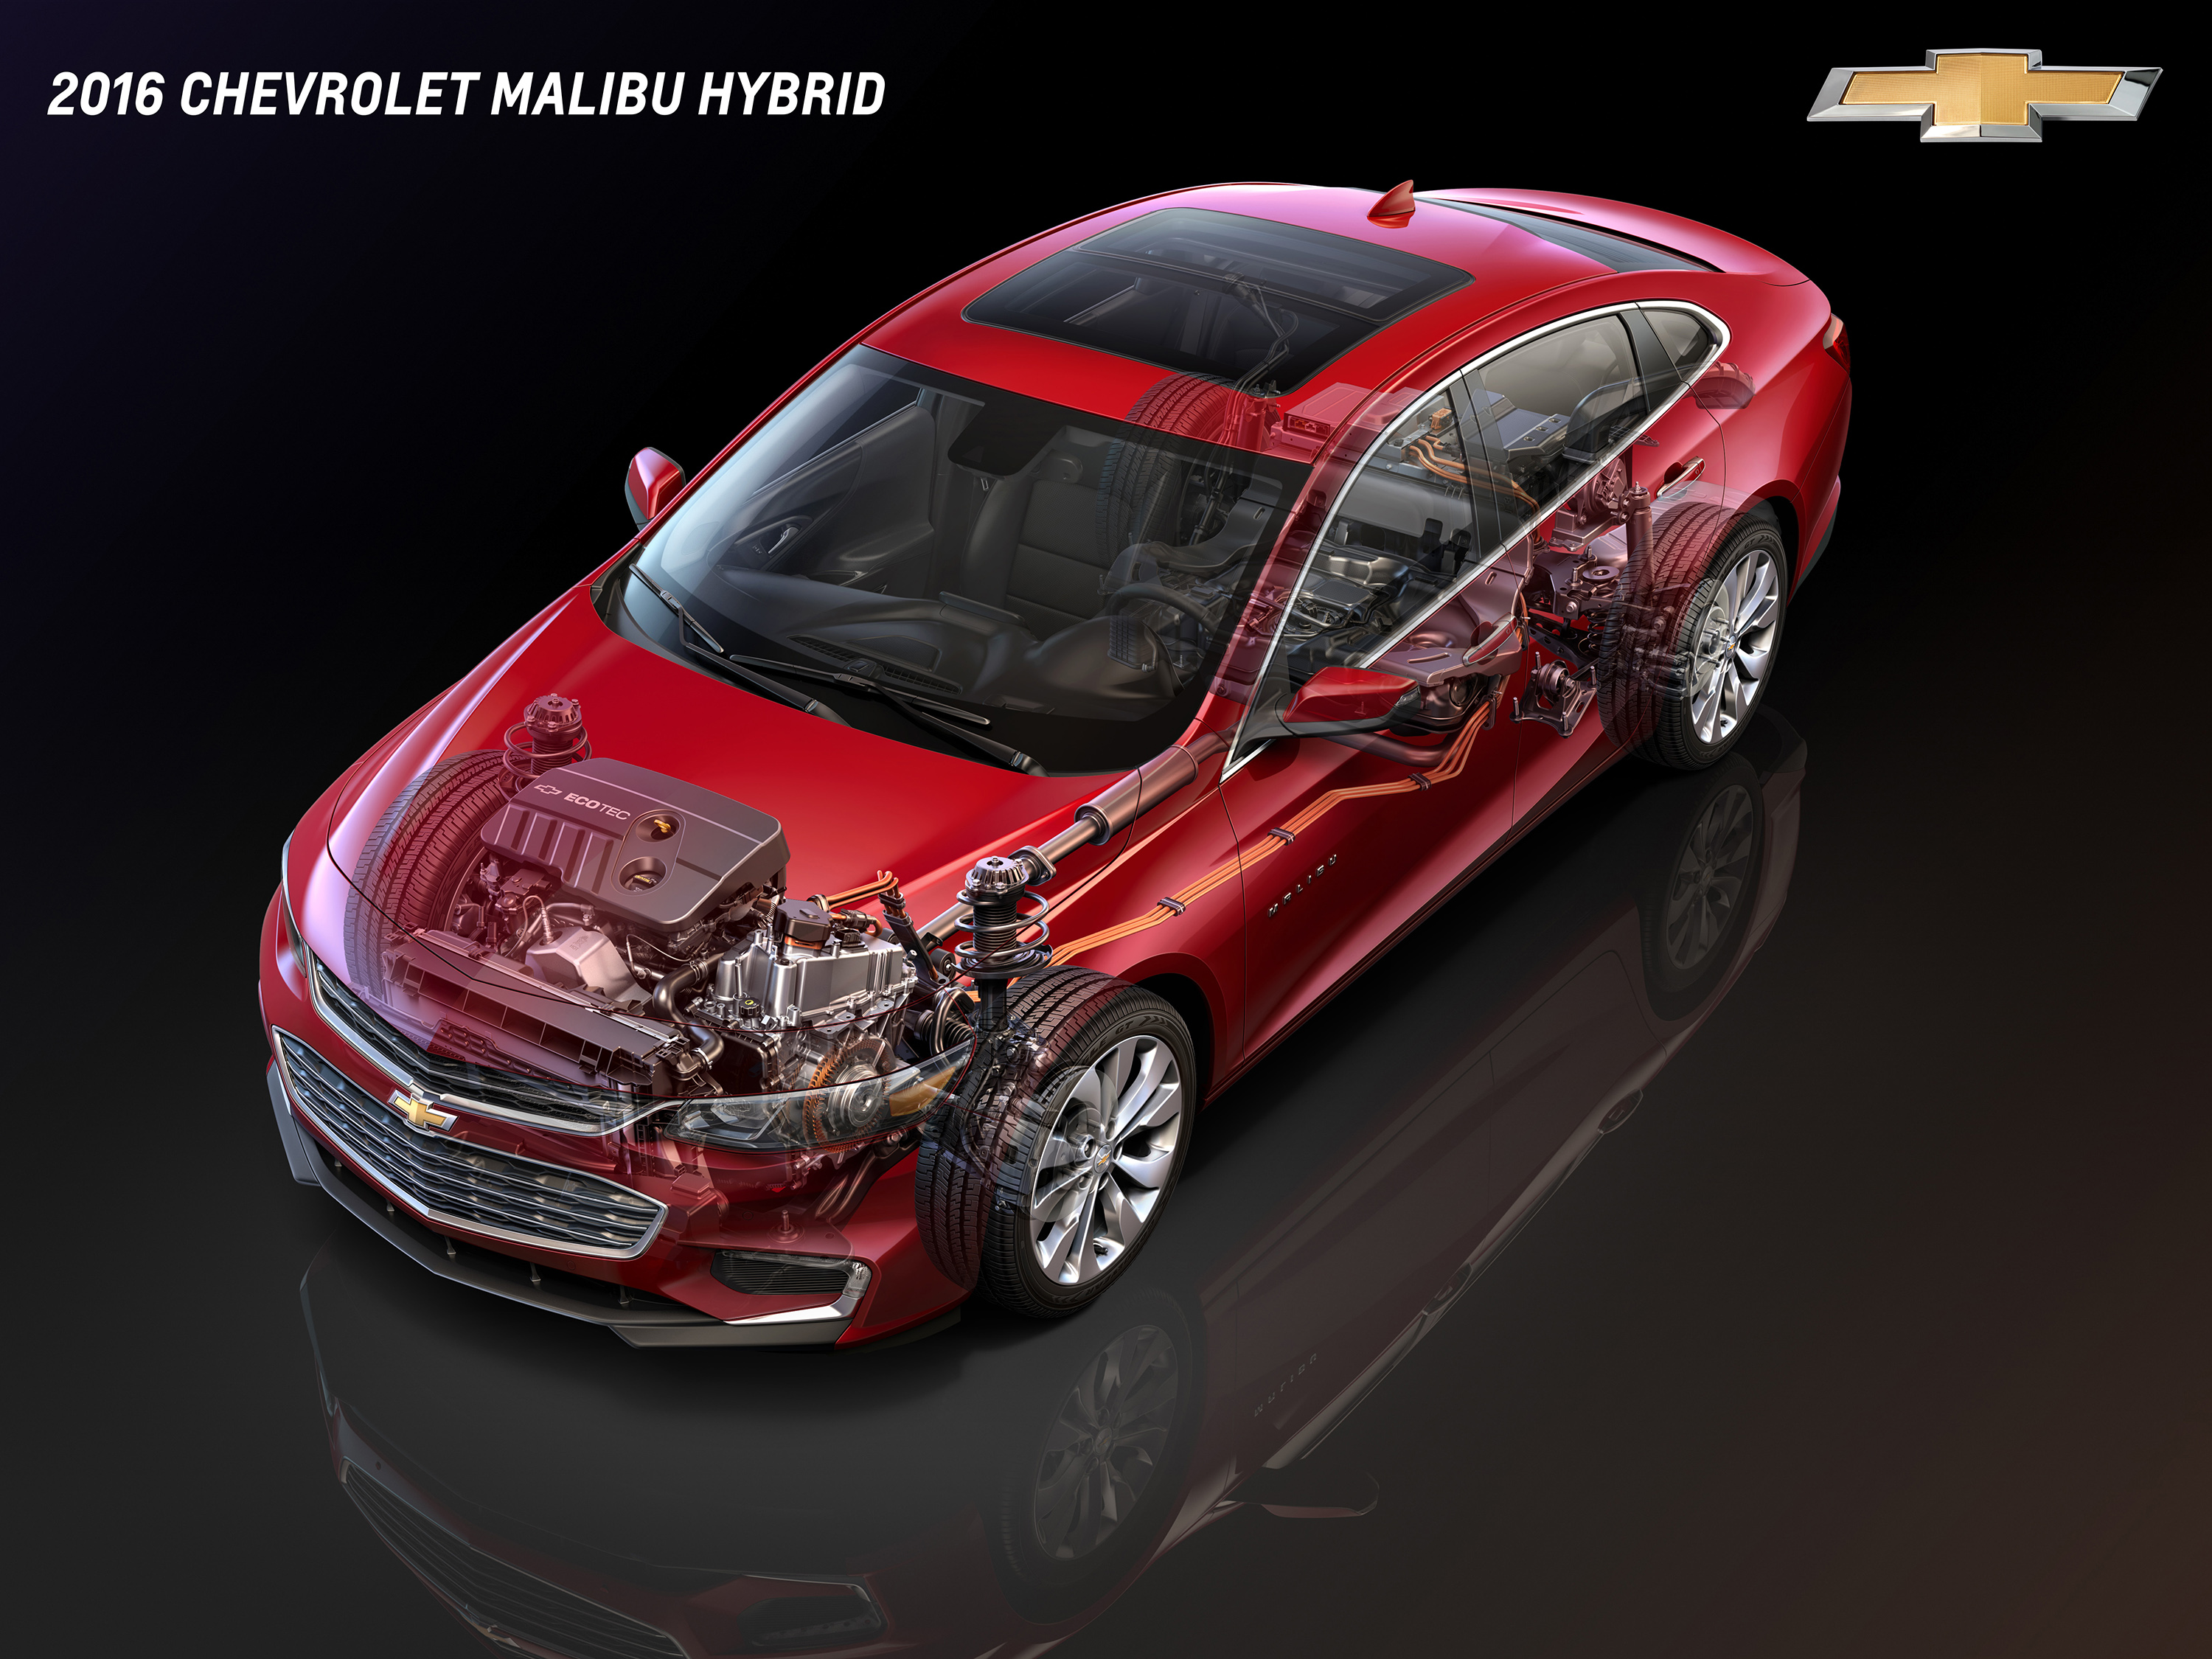 The 2016 Chevrolet Malibu Hybrid, which uses technology from the Chevrolet Volt, will offer a General Motors-estimated 48 mpg city, 45 mpg highway – and 47 mpg combined, unsurpassed in the segment.